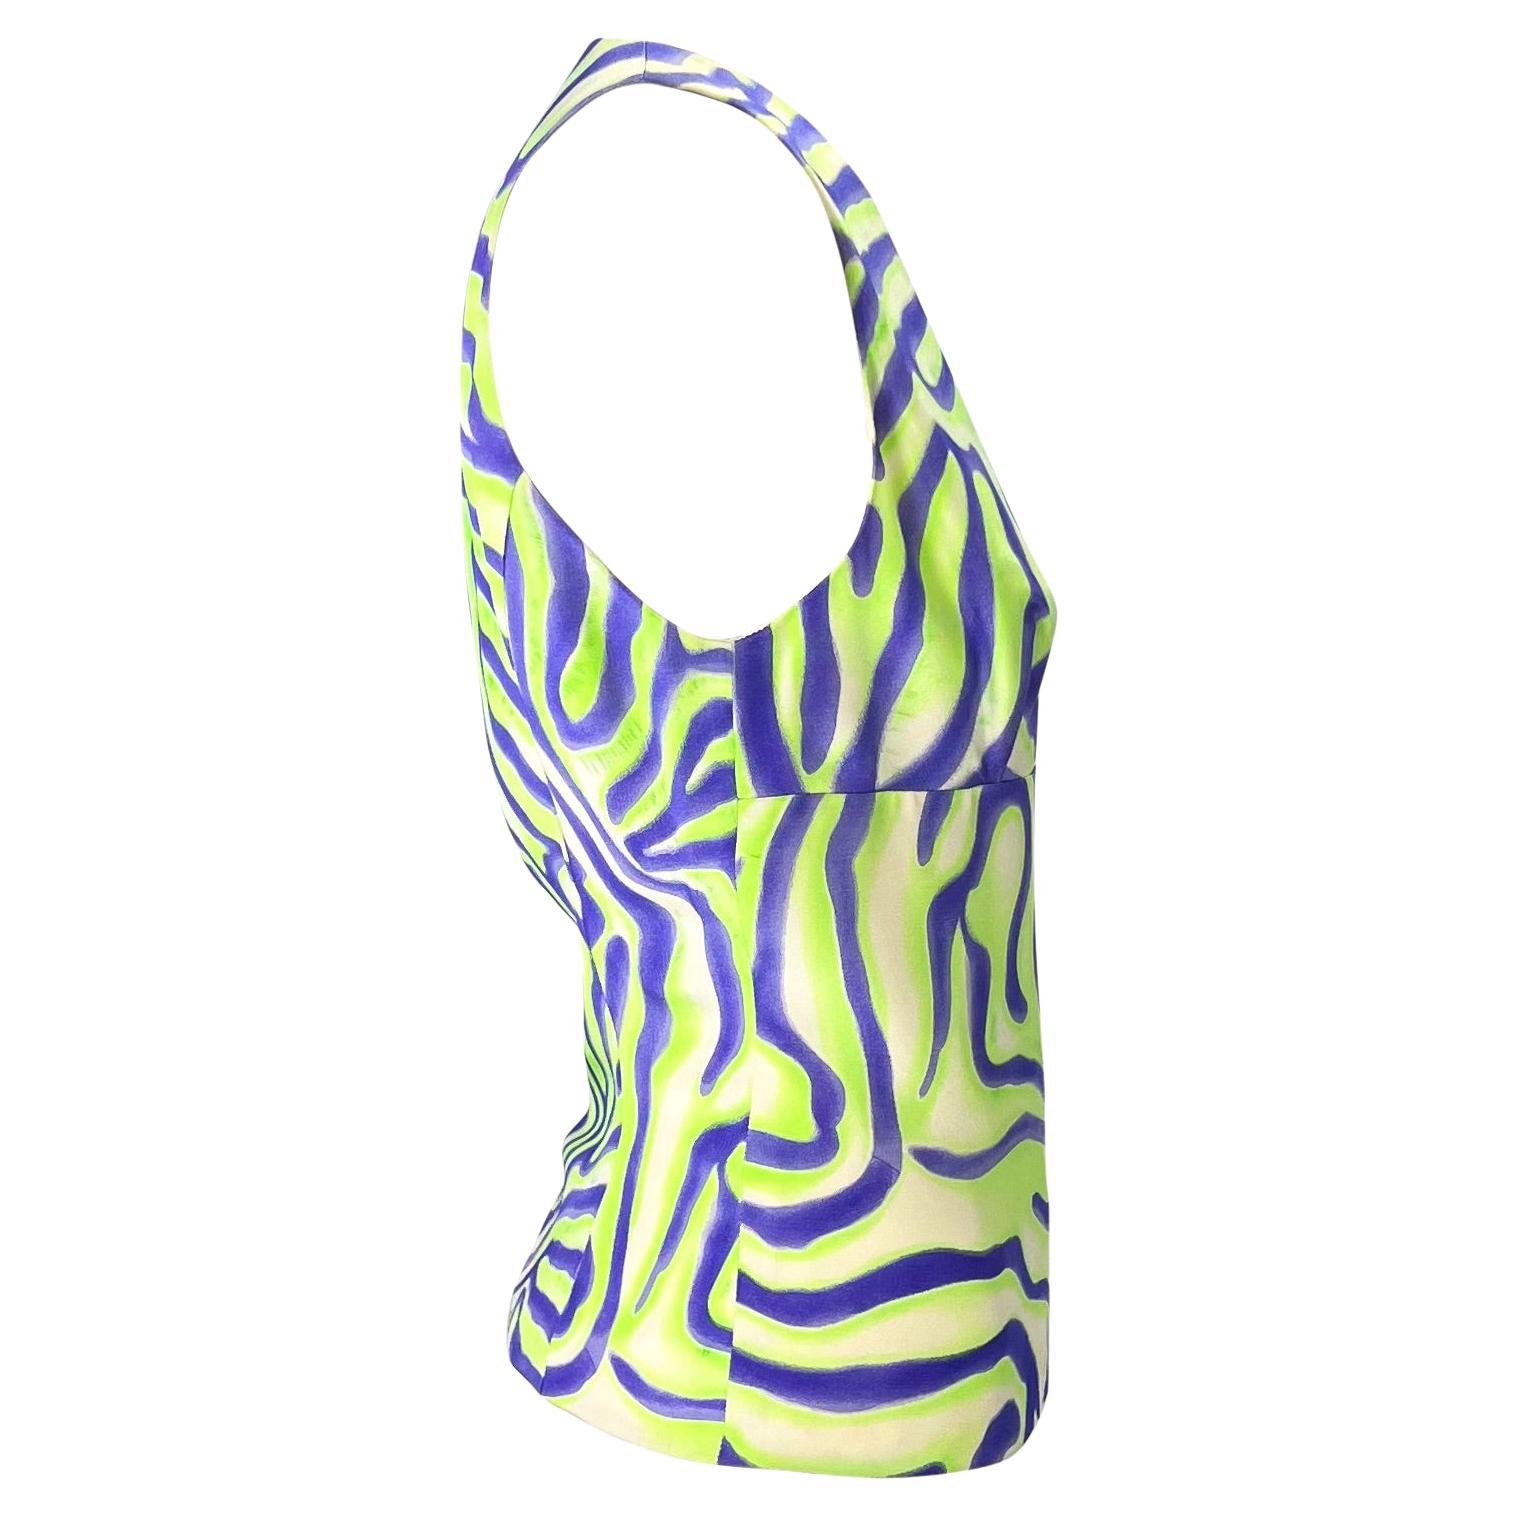 S/S 2000 Gianni Versace by Donatella Silk Purple Abstract Print Sleeveless Top In Excellent Condition For Sale In West Hollywood, CA